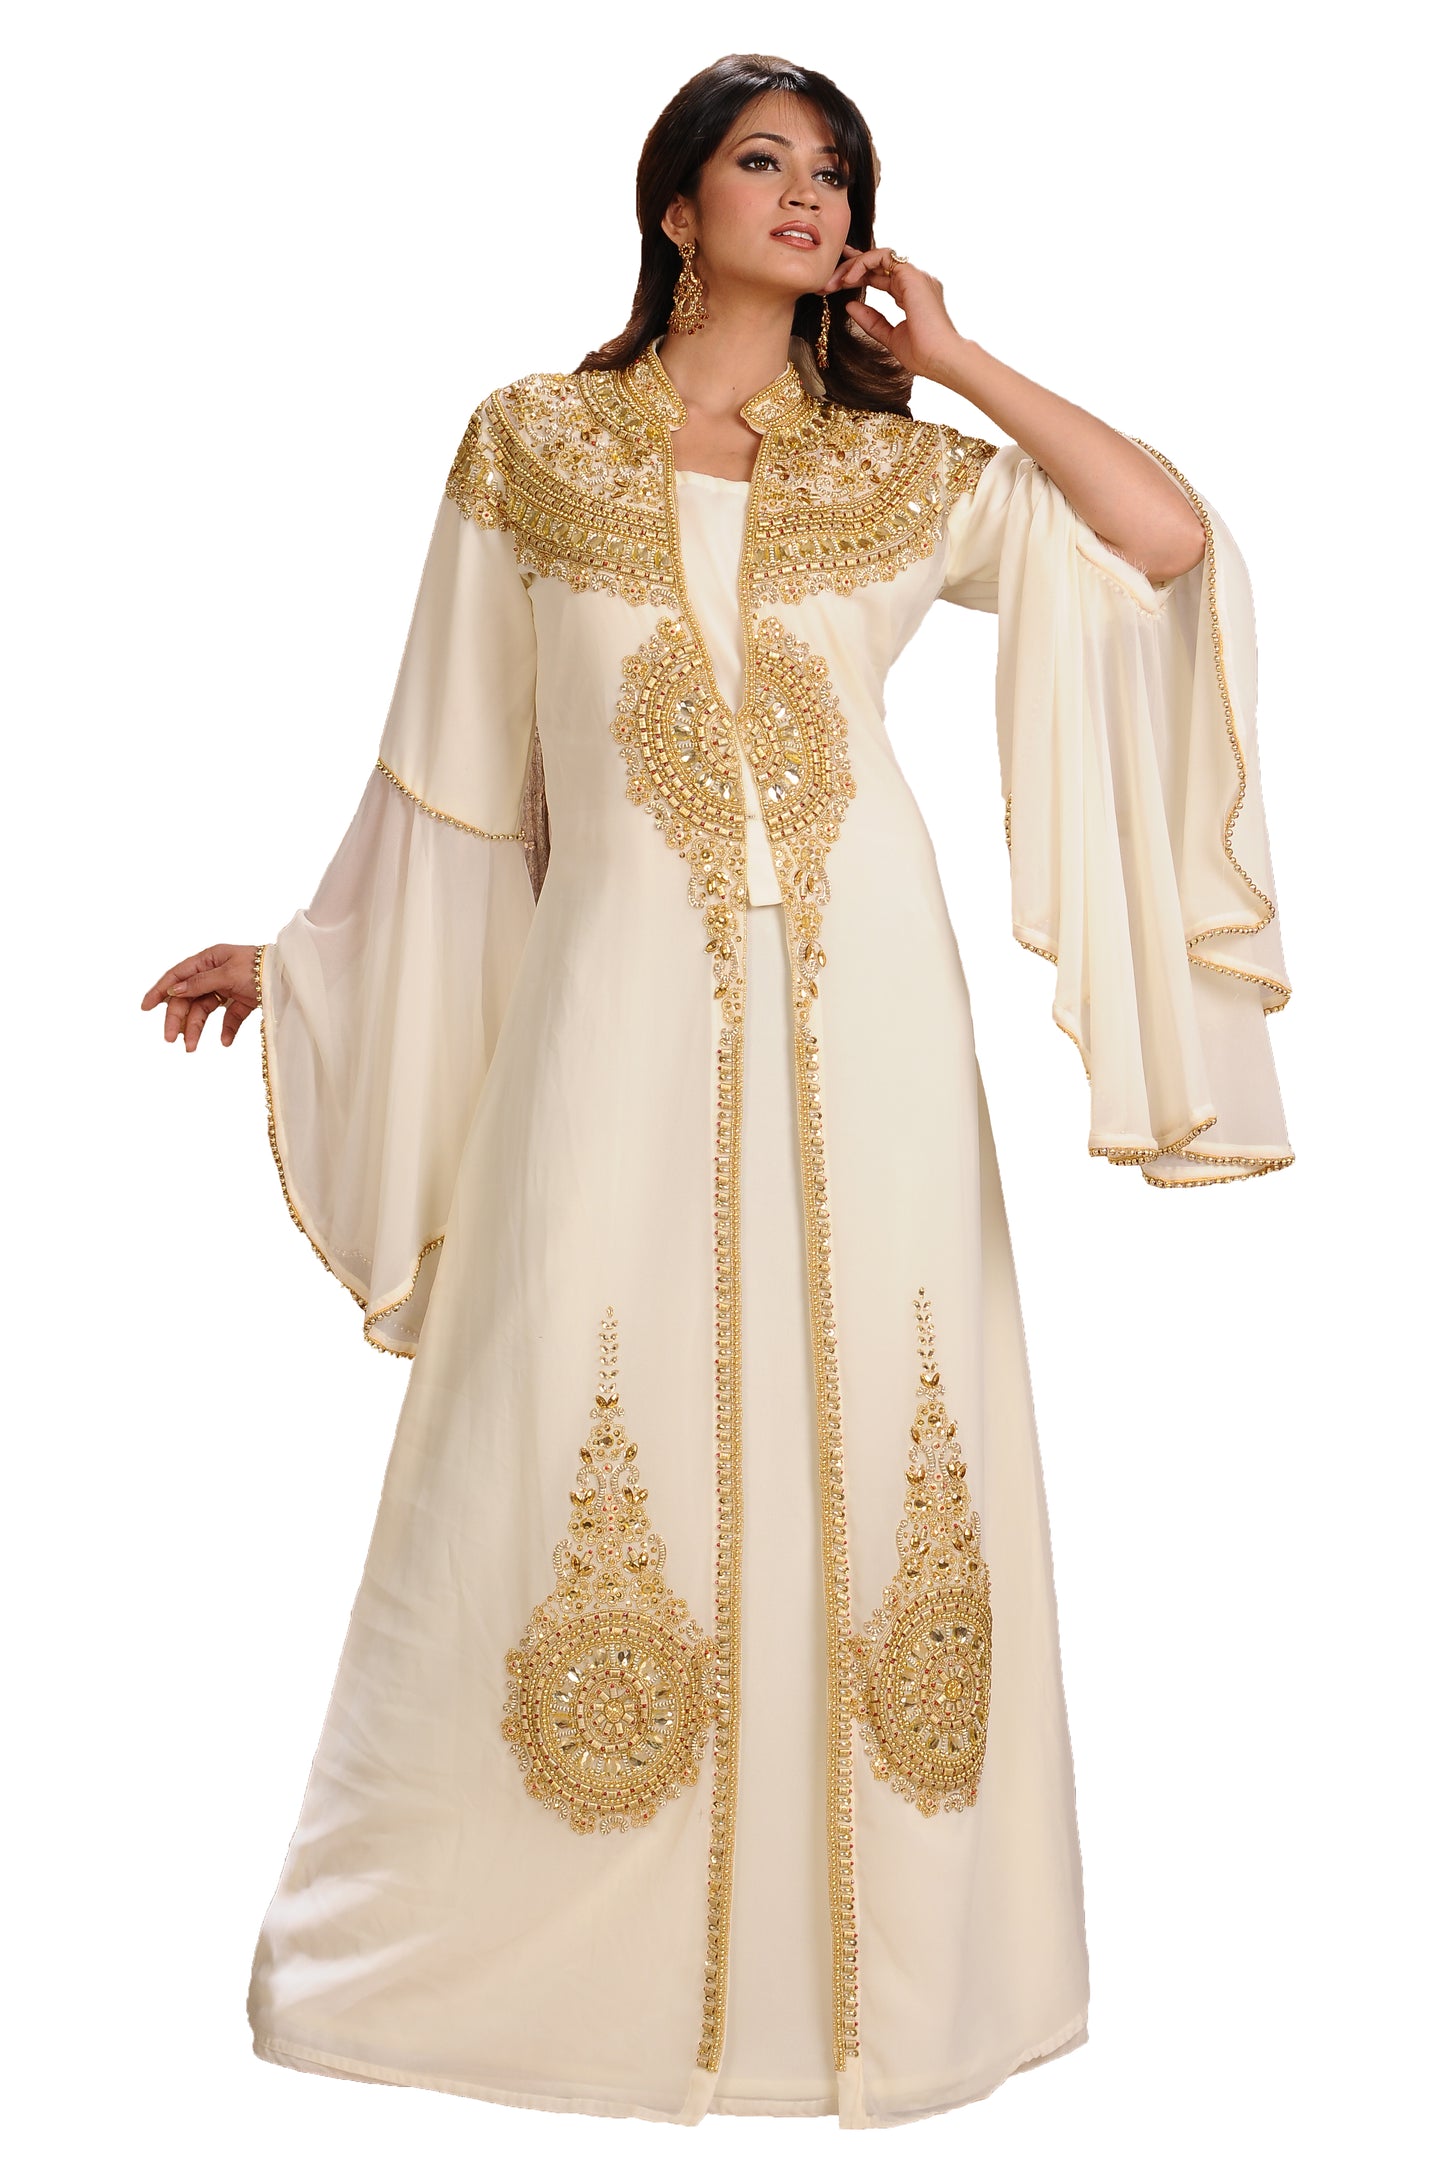 Embroidered Caftan Cocktail Party Gown - Maxim Creation